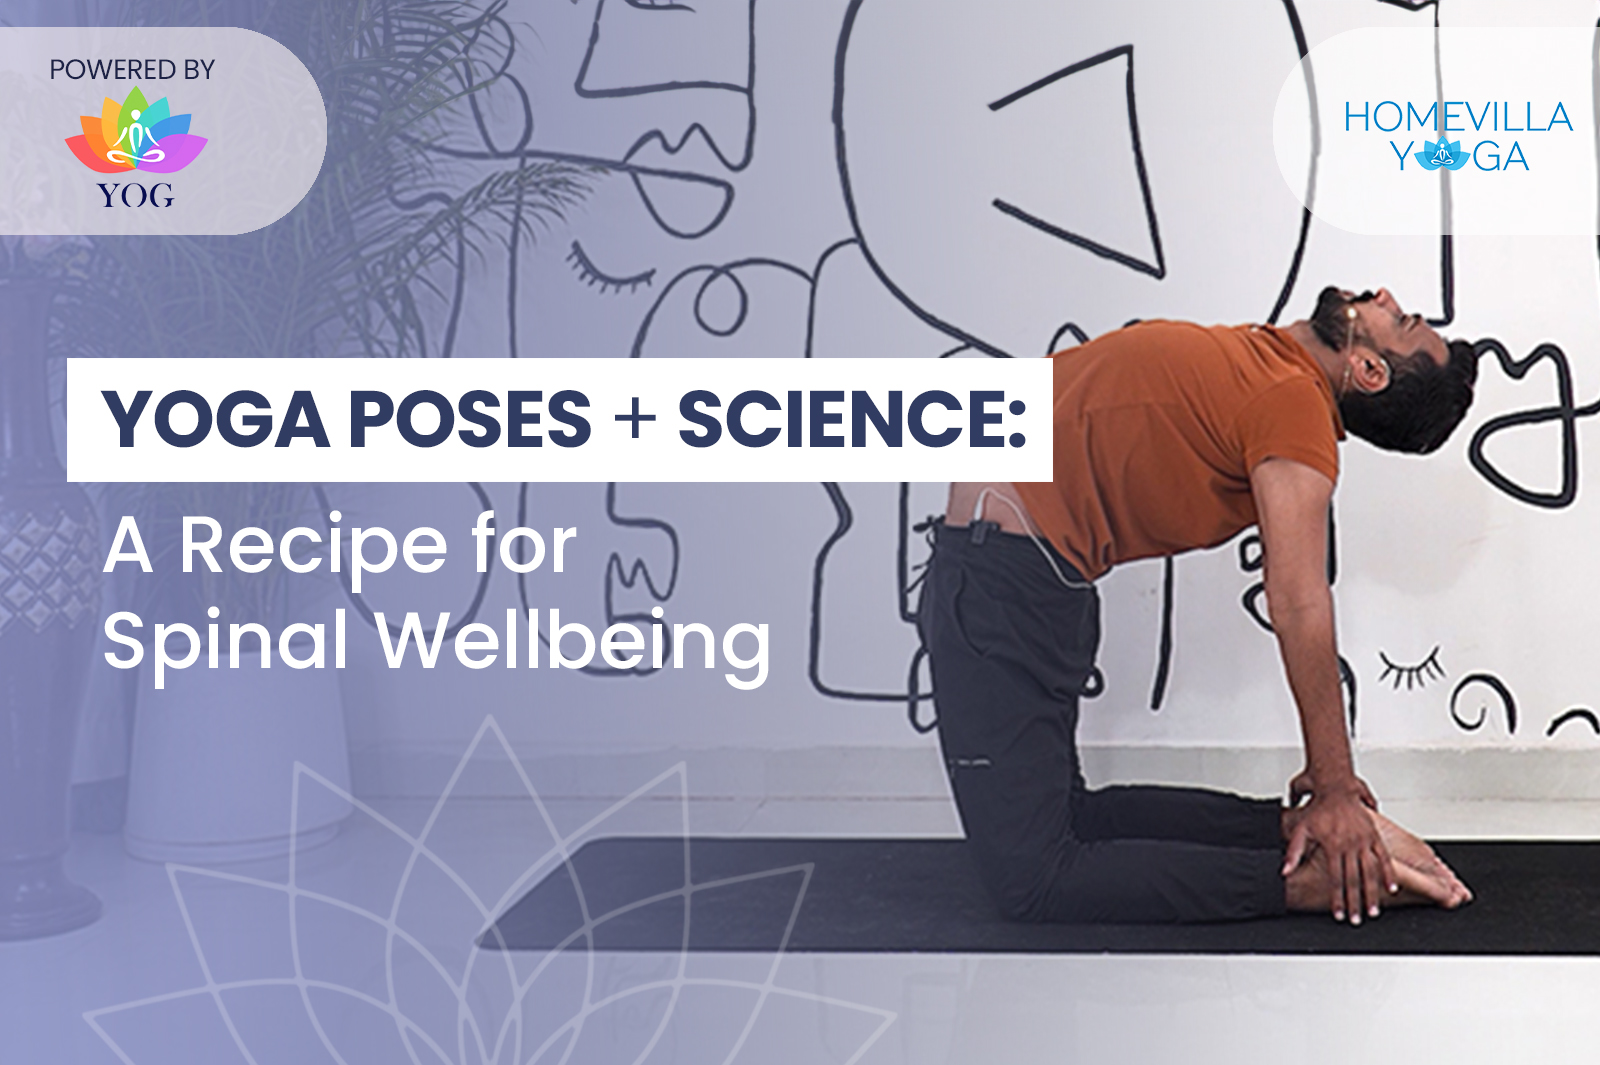 Yoga Poses + Science = A Recipe for Spinal Wellbeing